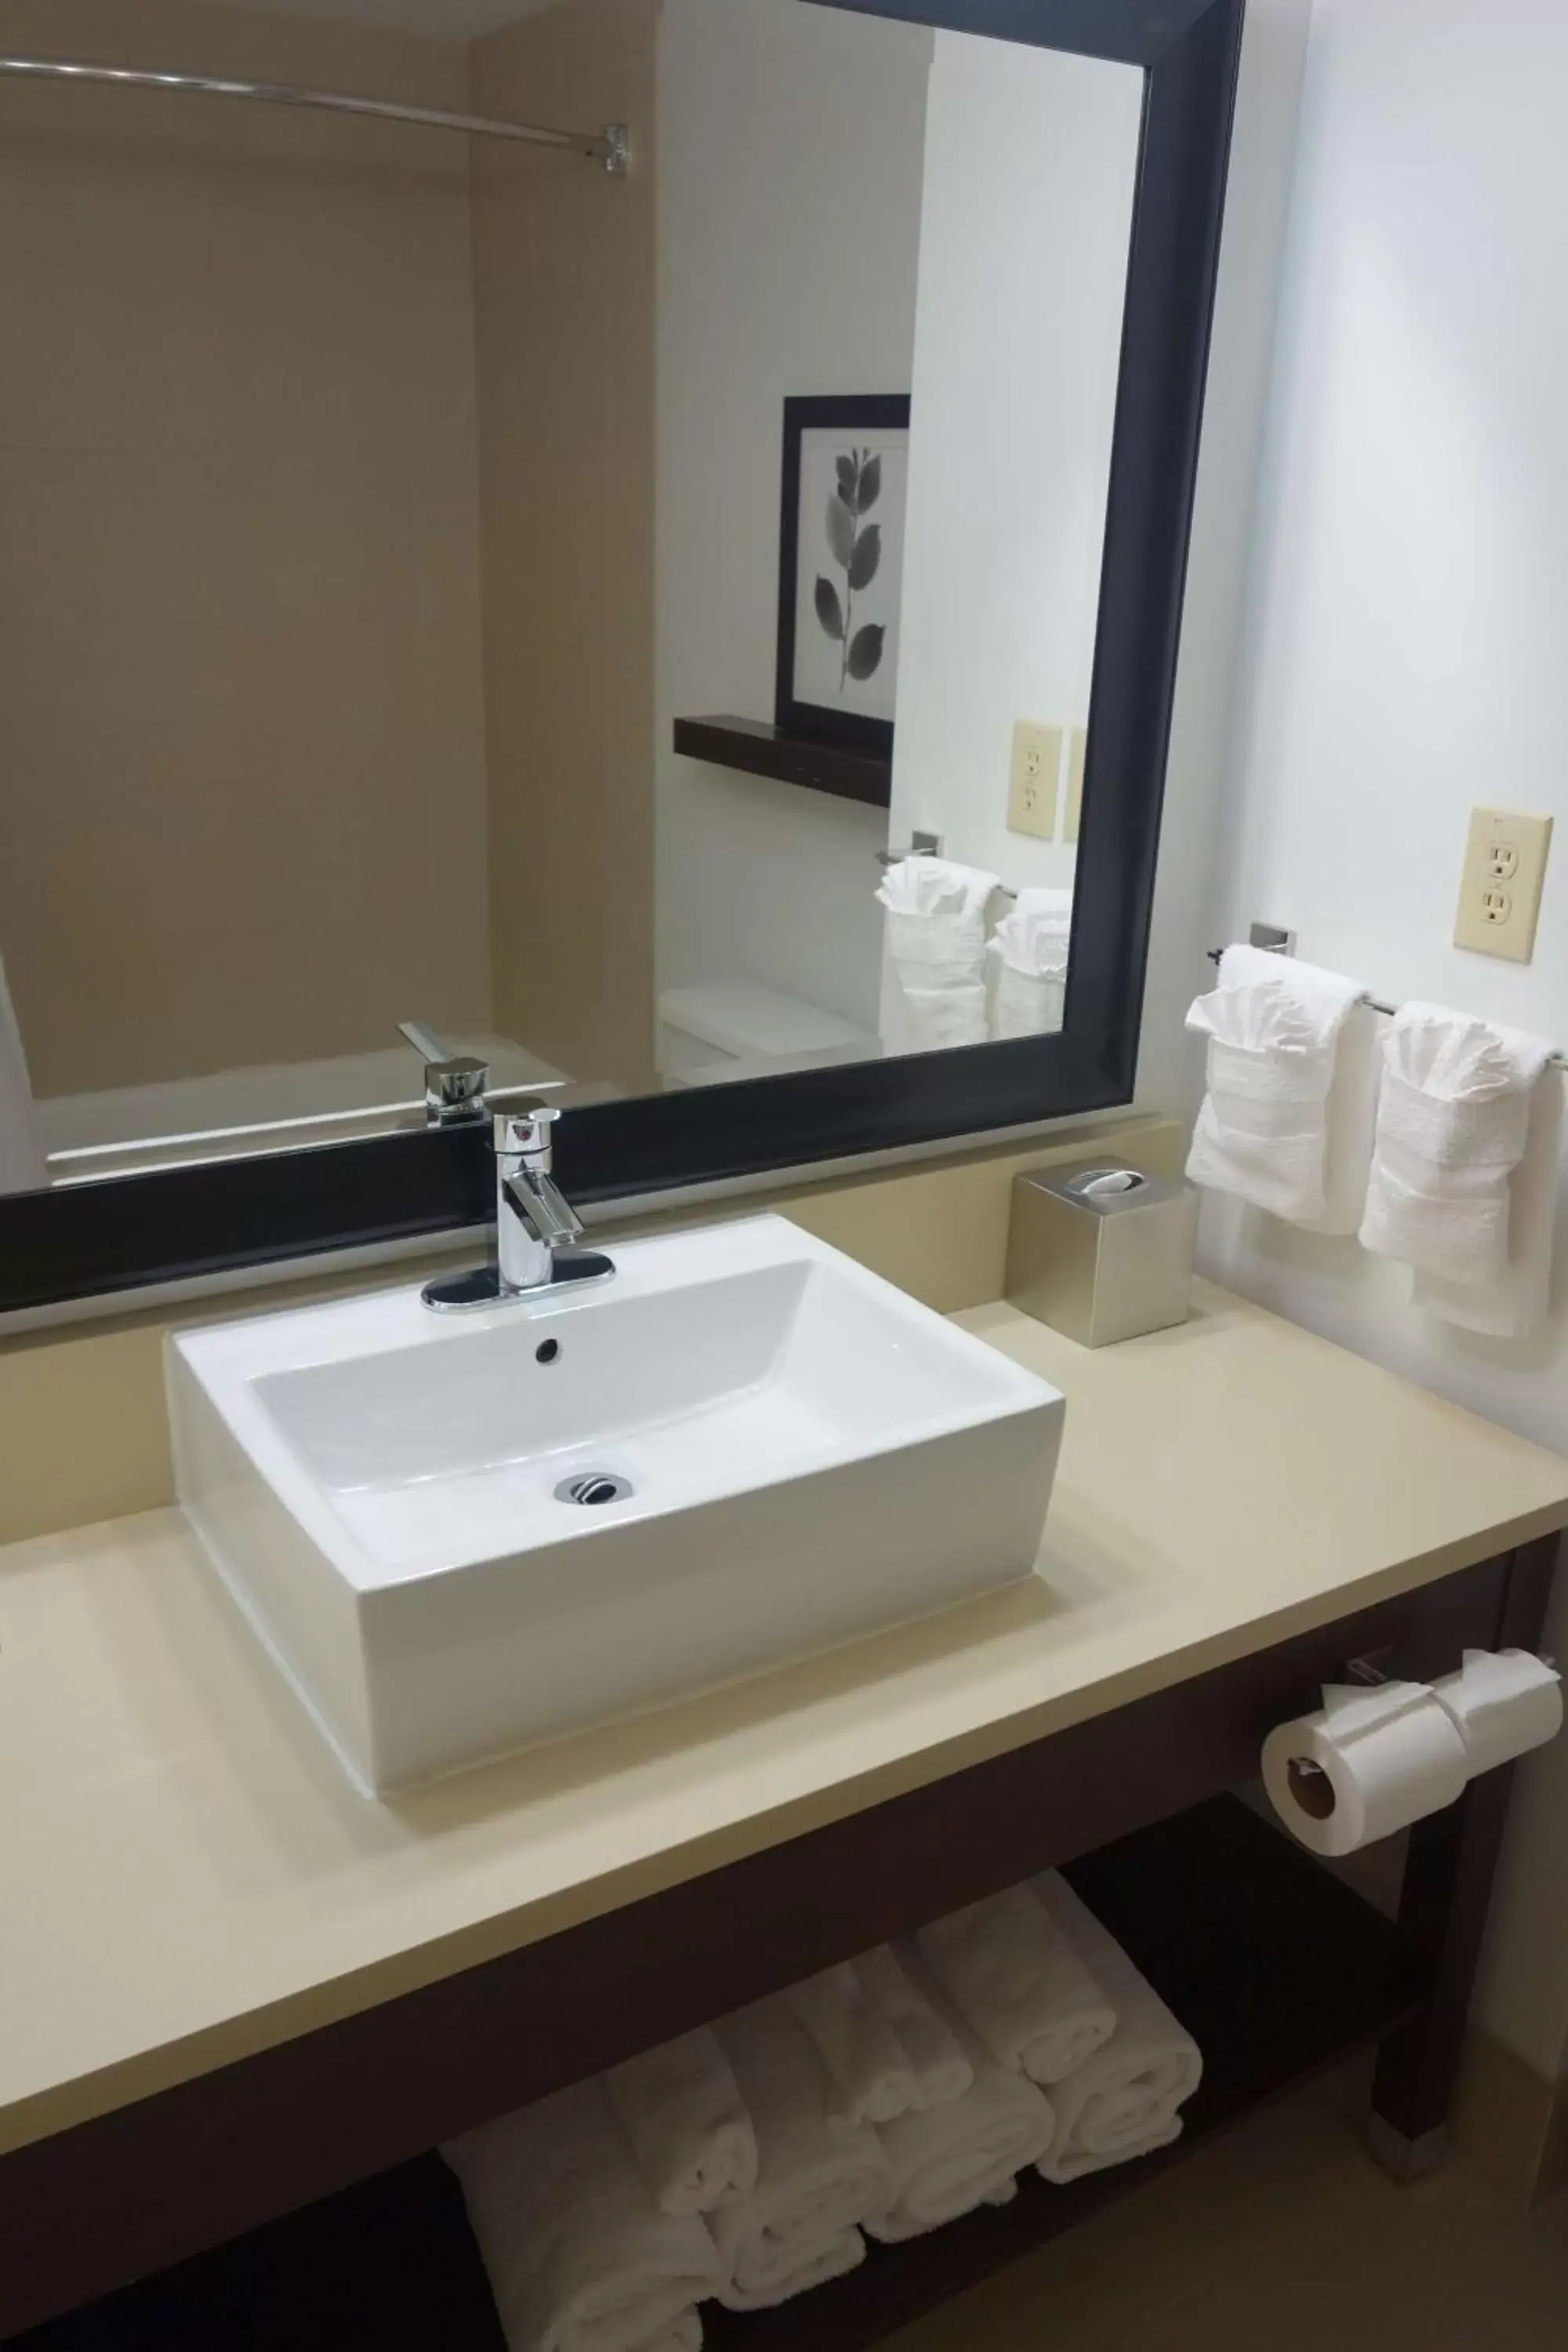 Bathroom in Country Inn & Suites by Radisson, Lawrenceville, GA